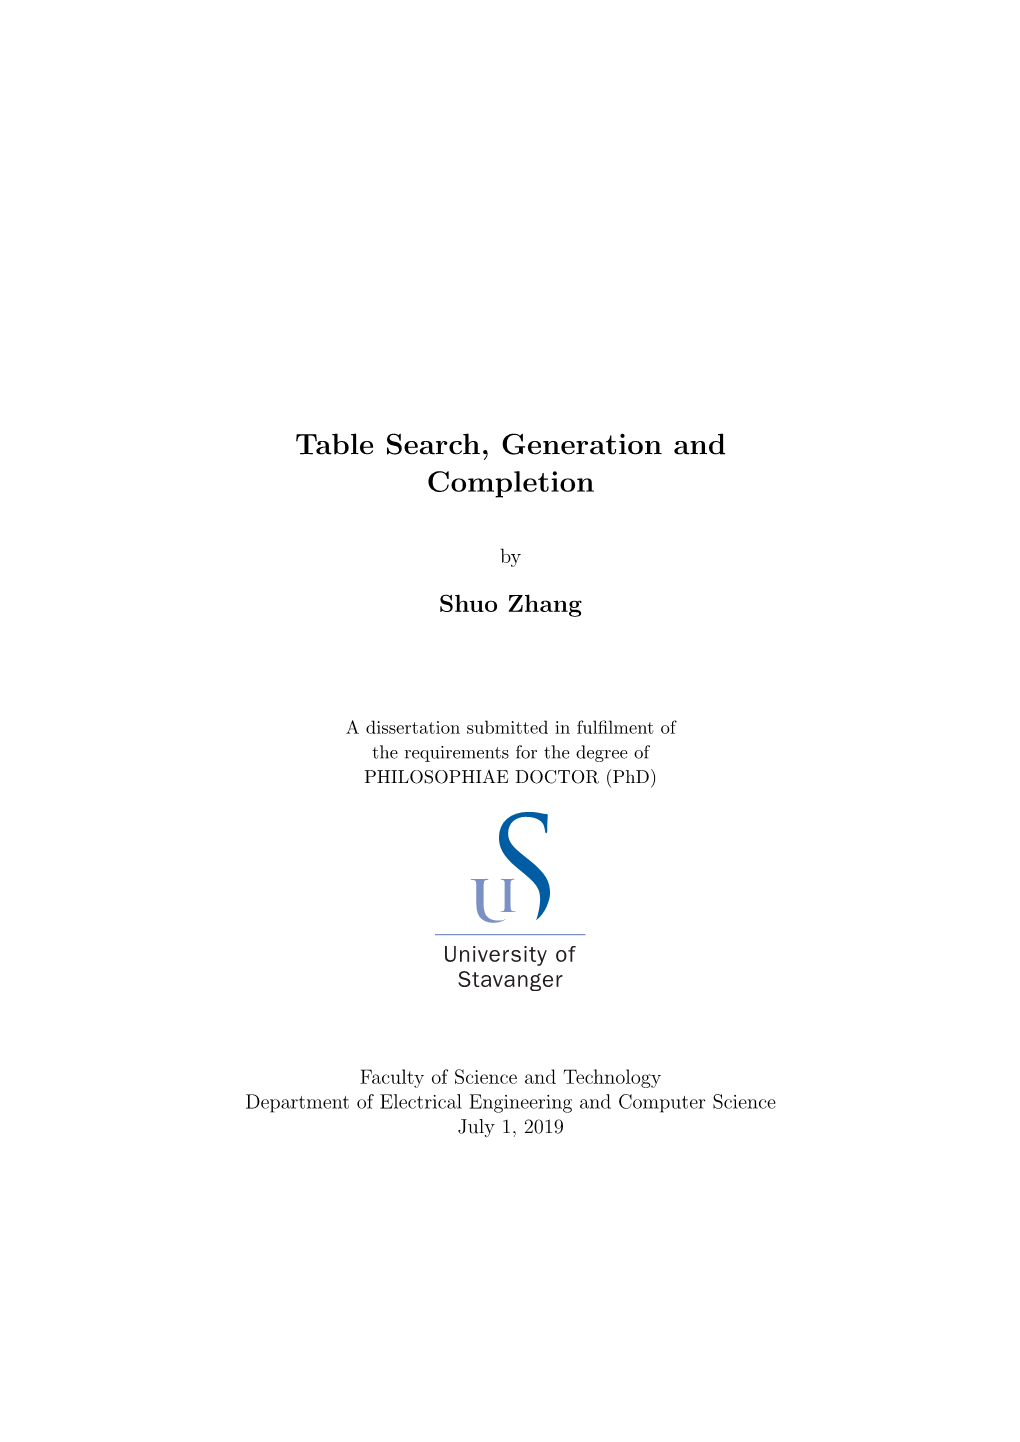 Table Search, Generation and Completion